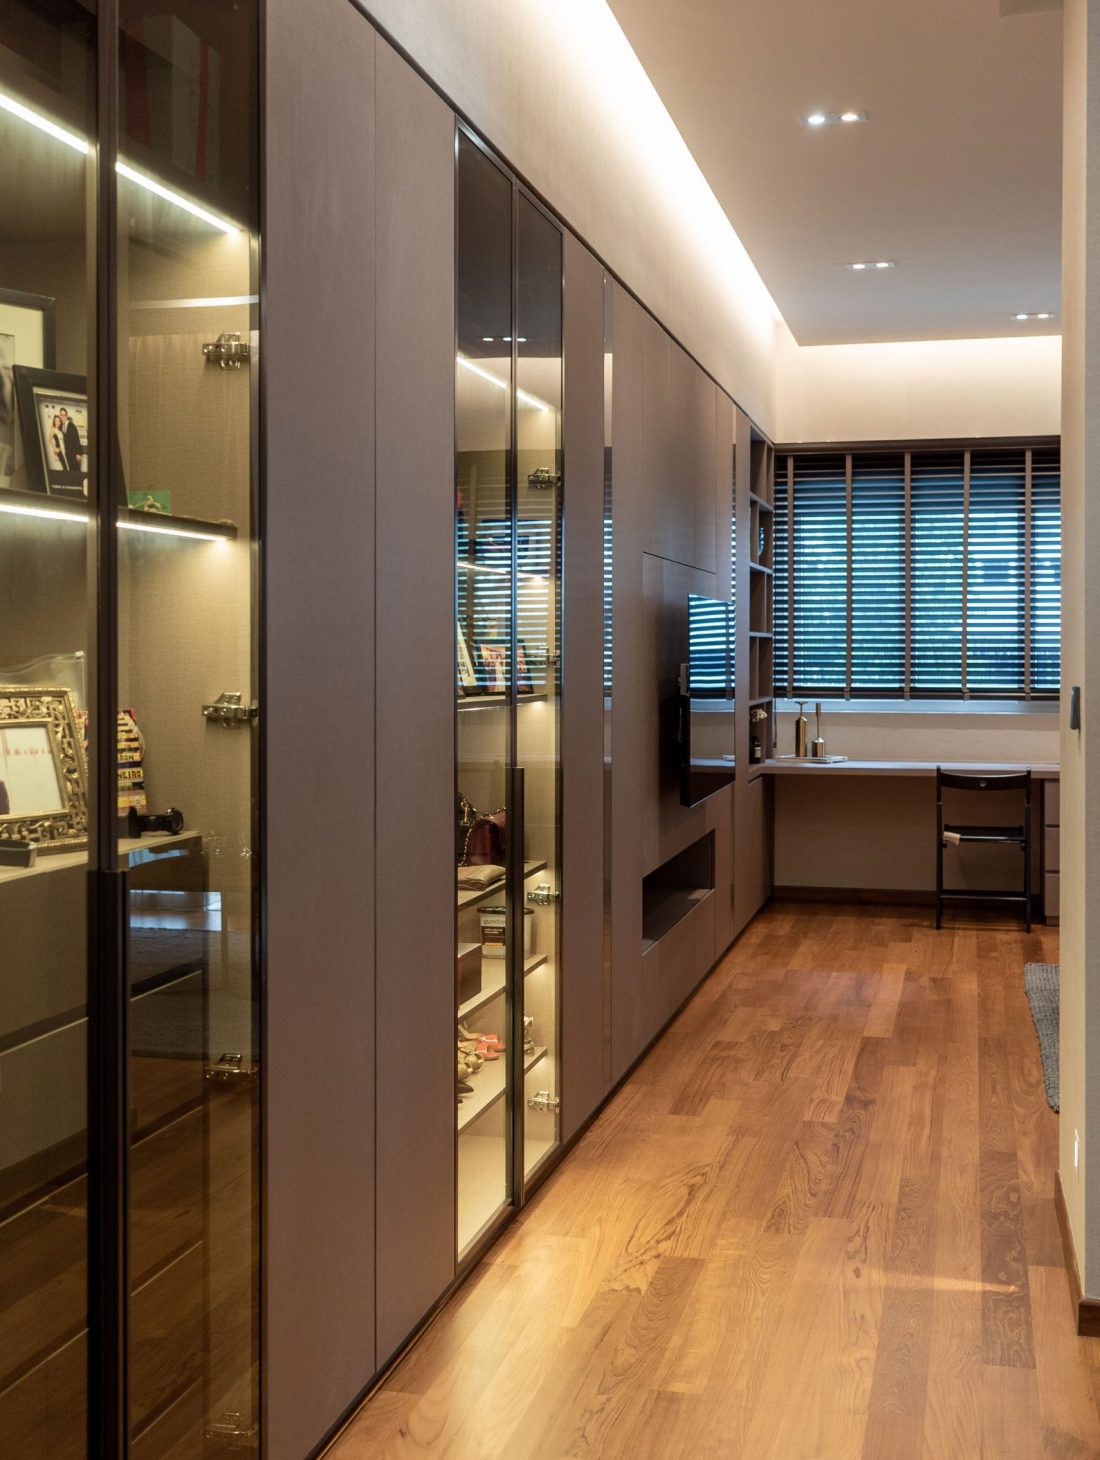 Display-Units-and-Walk-in-Wardrobe-for-modern-Luxury-interior-design-landed-property-home-at-dunbar-walk-by-Juz-Interior-and-Jennifer-Tan